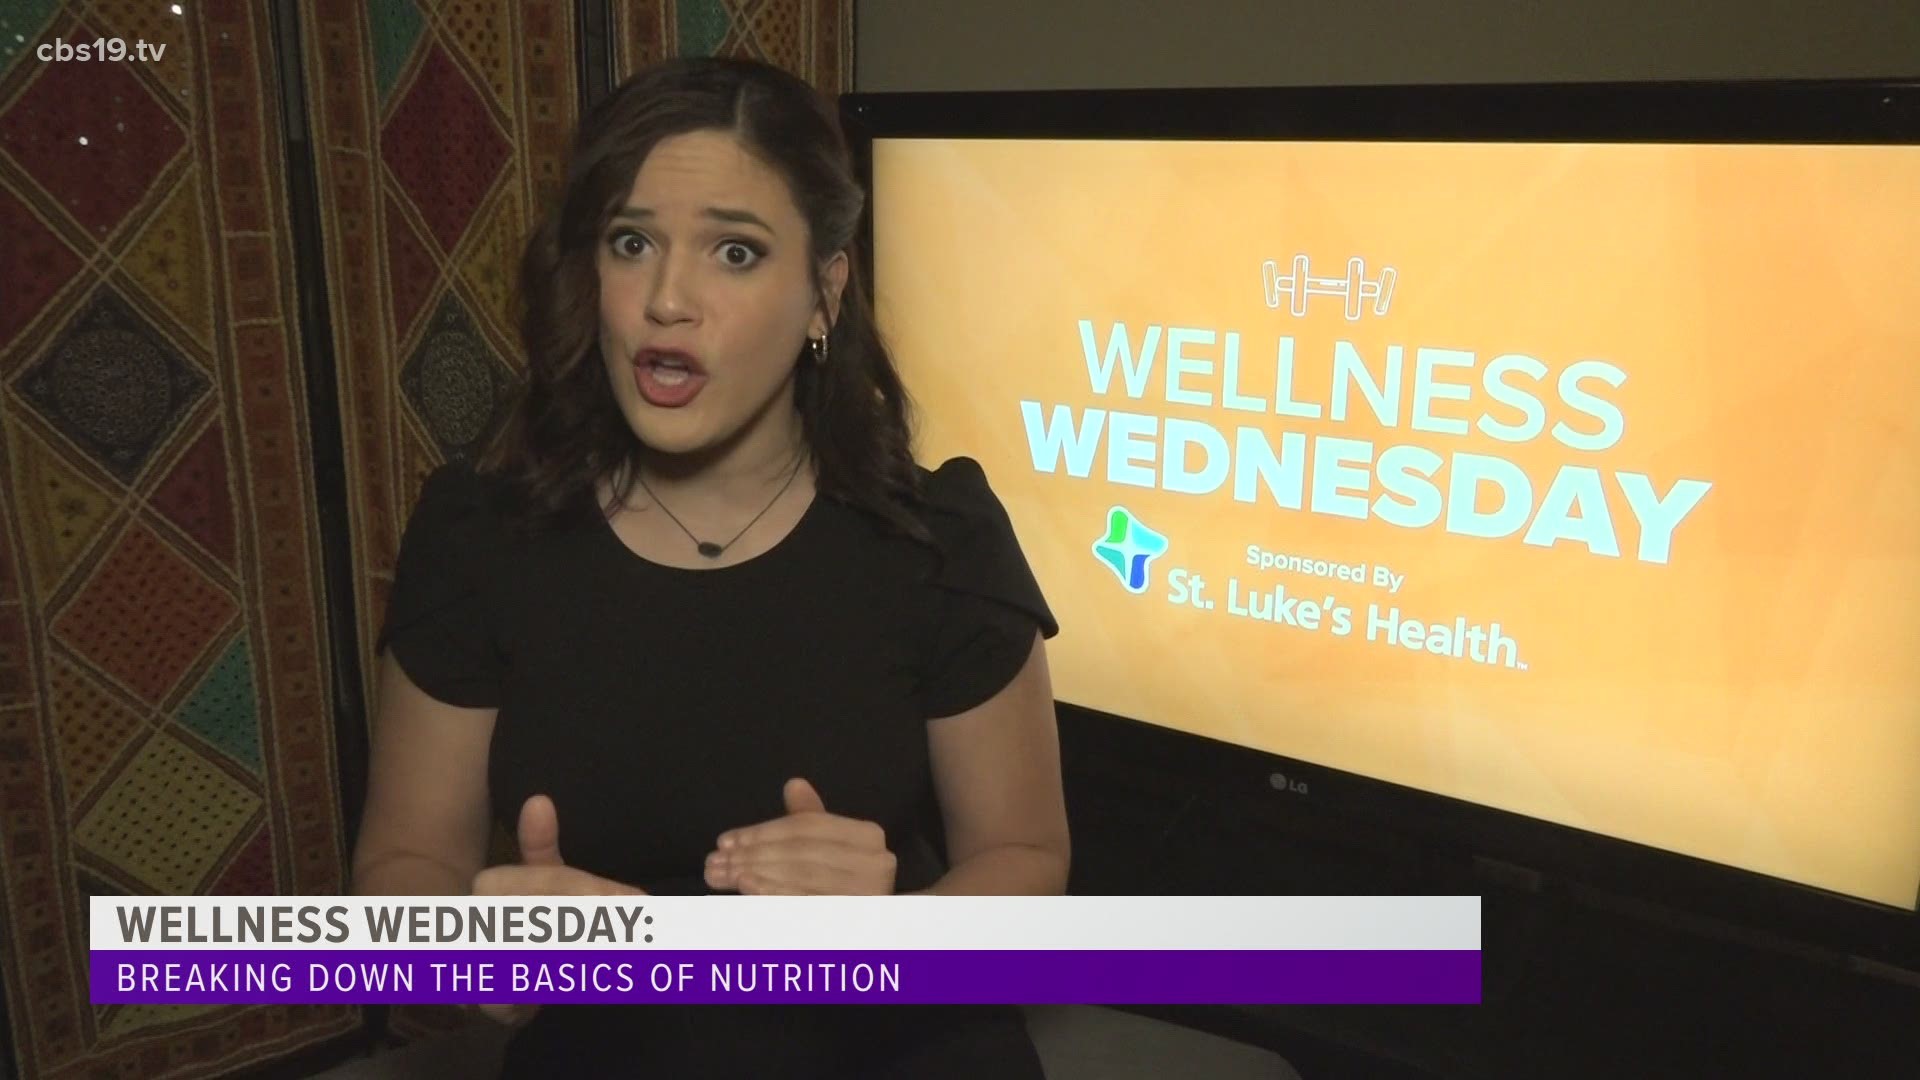 Wellness Wednesday: Breaking down the basics of nutrition